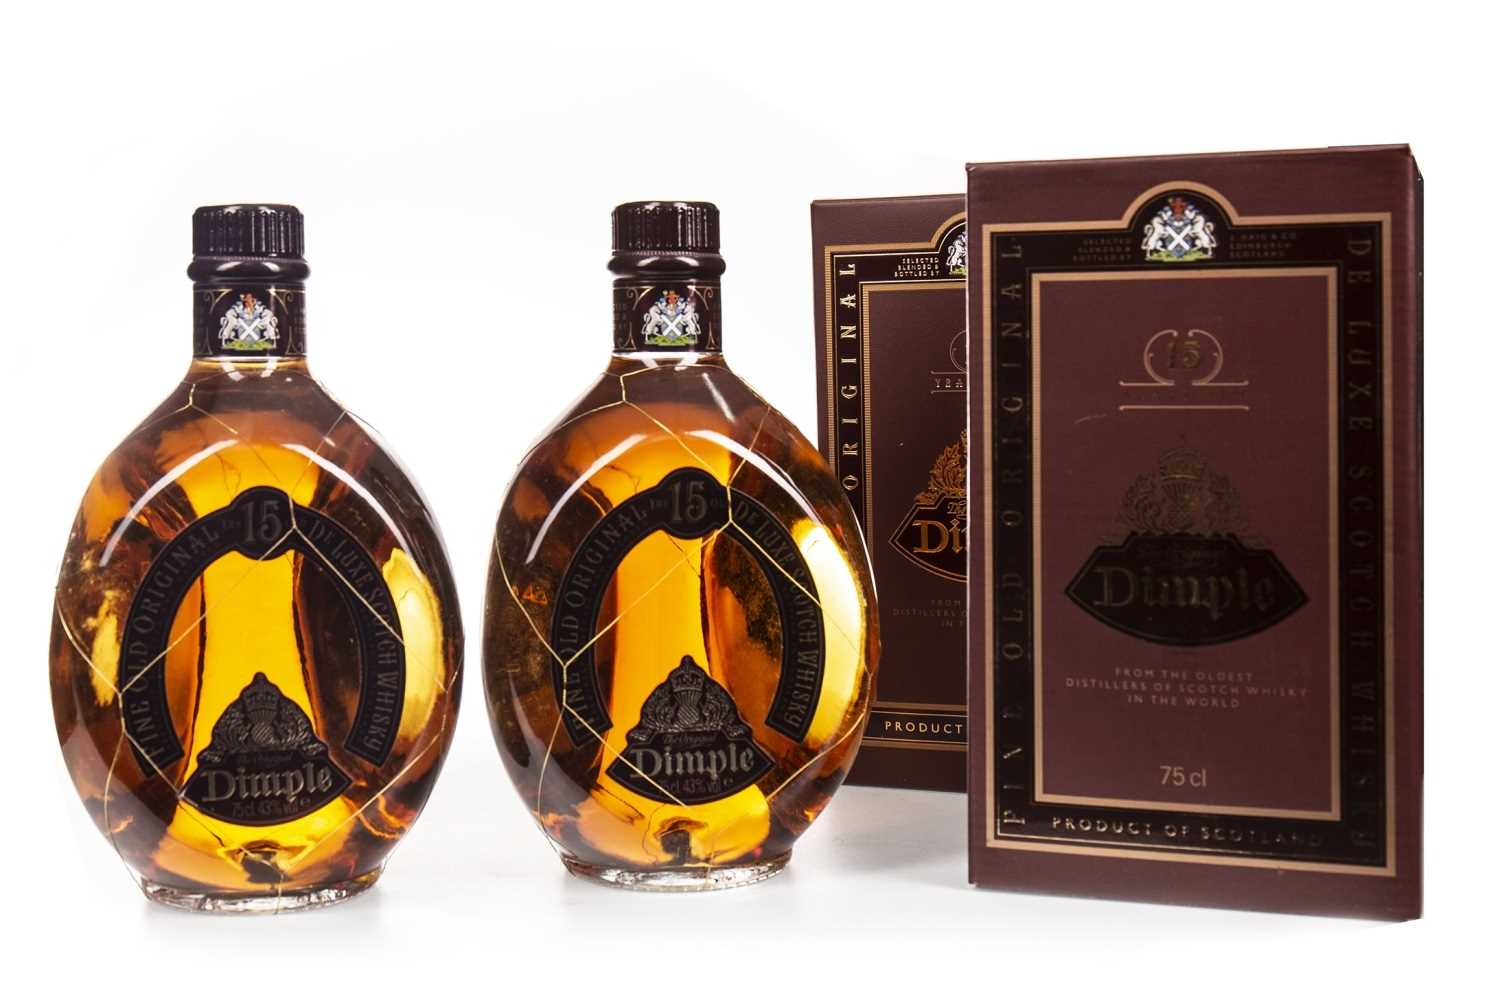 Lot 414 - TWO BOTTLES OF DIMPLE 15 YEARS OLD